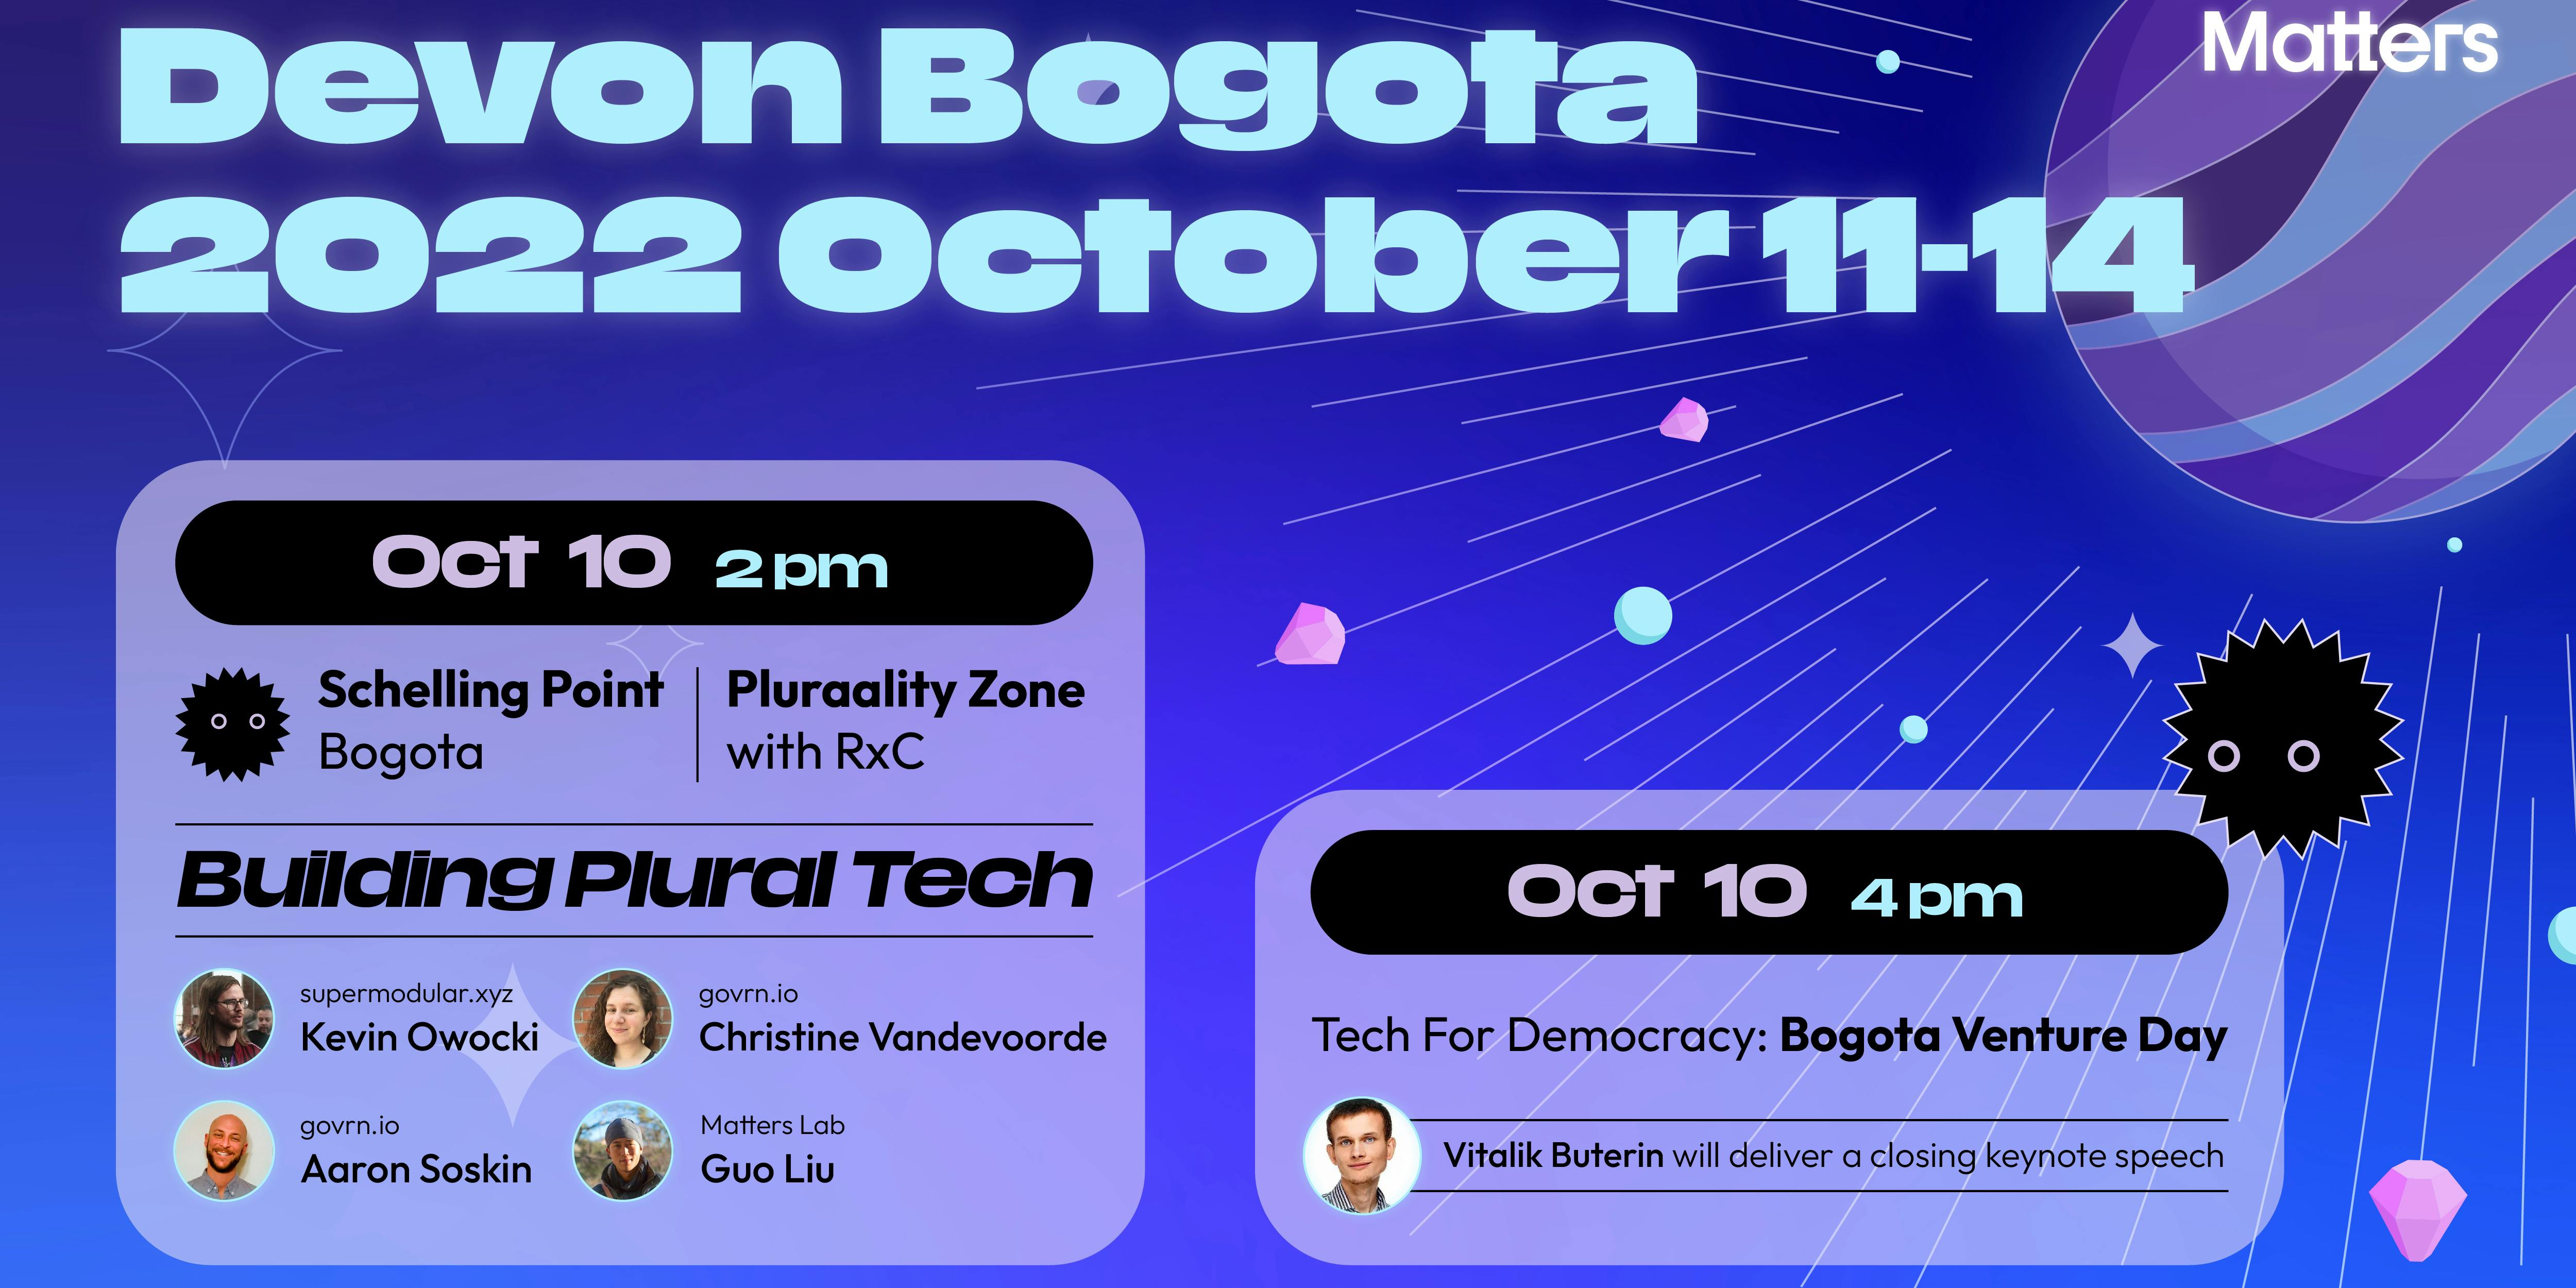 Devcon BOGOTÁ: Meet Matters Lab at Schelling Point and Tech4Democracy Venture Day with RxC, Ethereum Foundation & Gitcoin